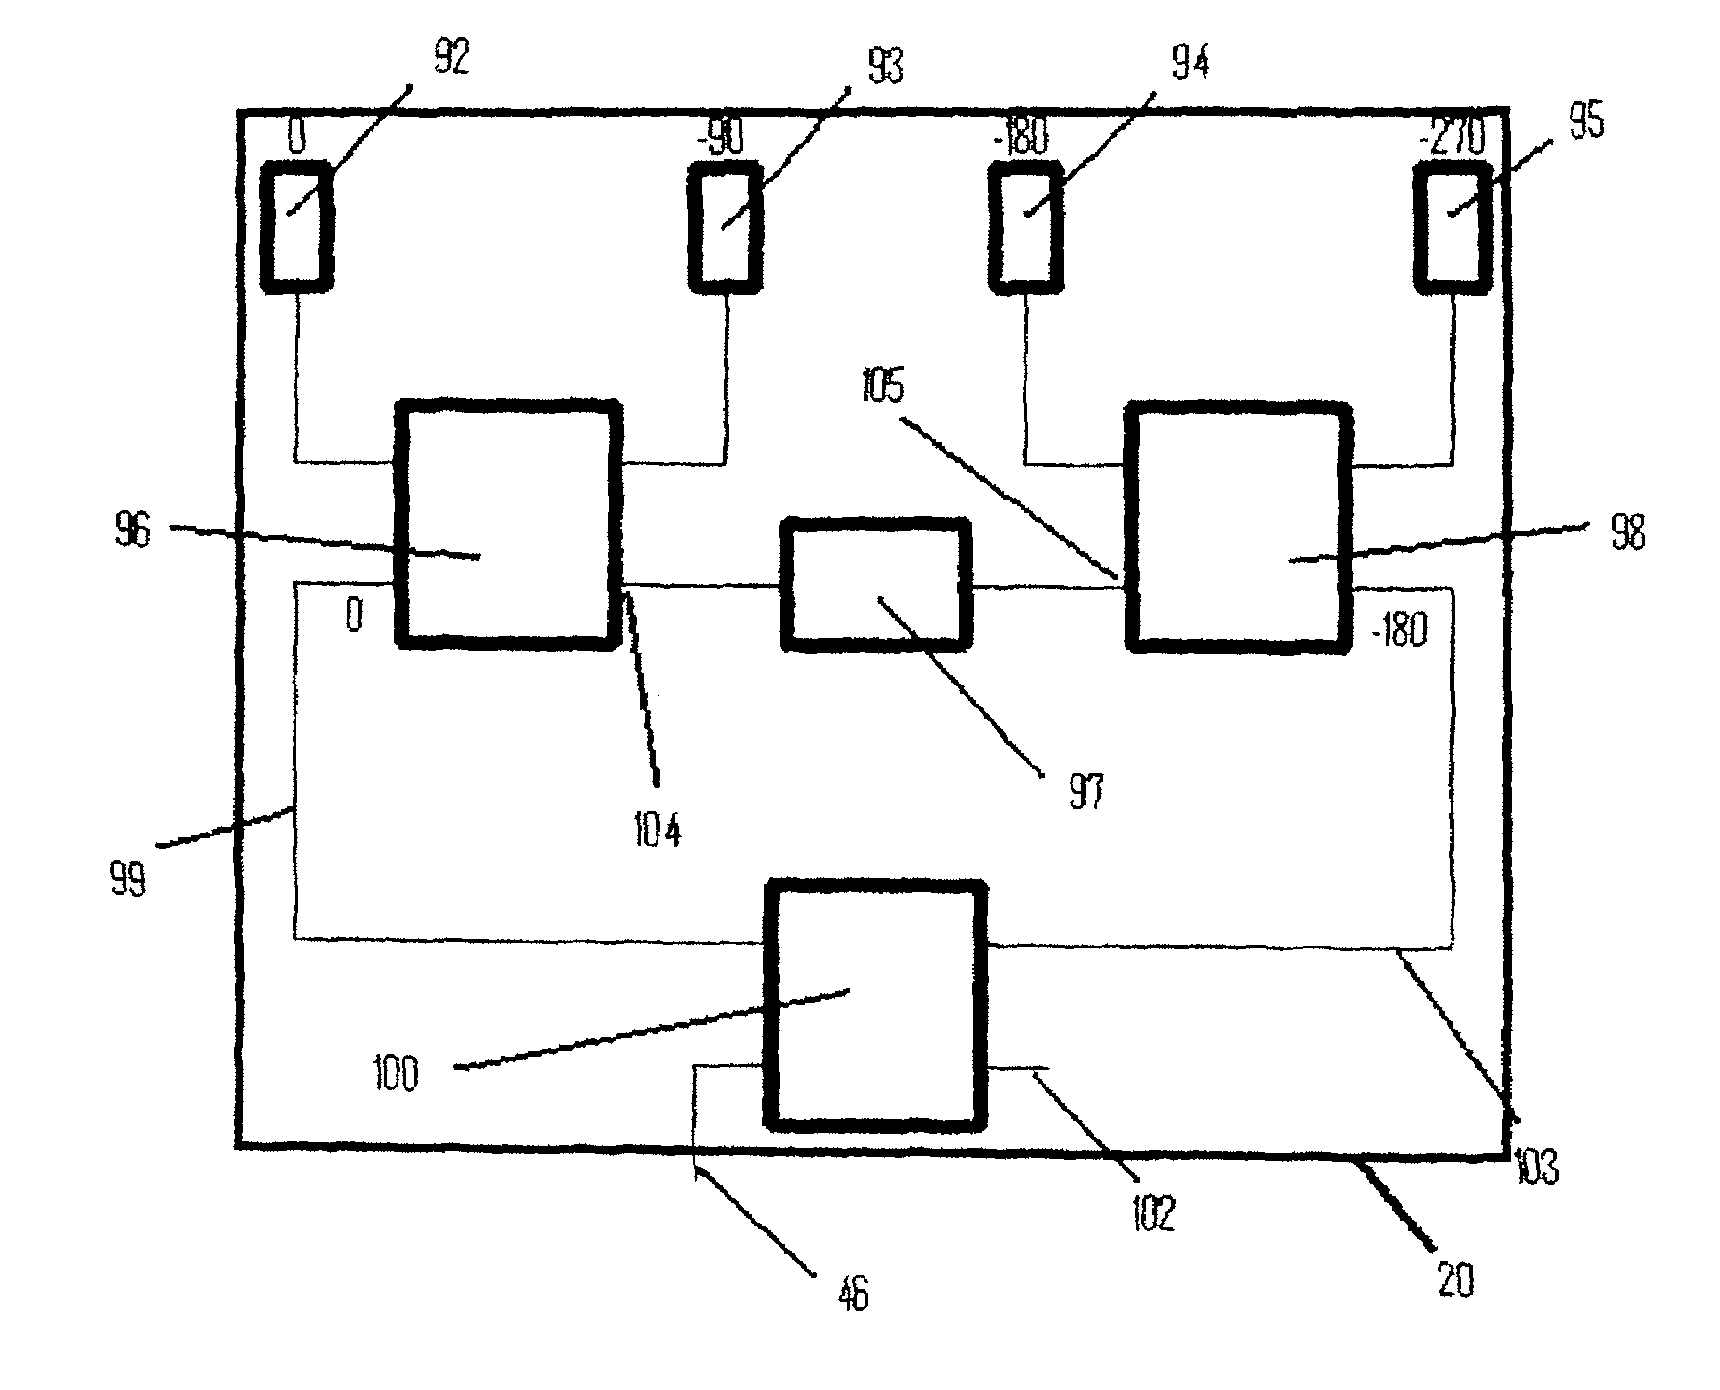 Method and apparatus for quadrifilar antenna with open circuit element terminations